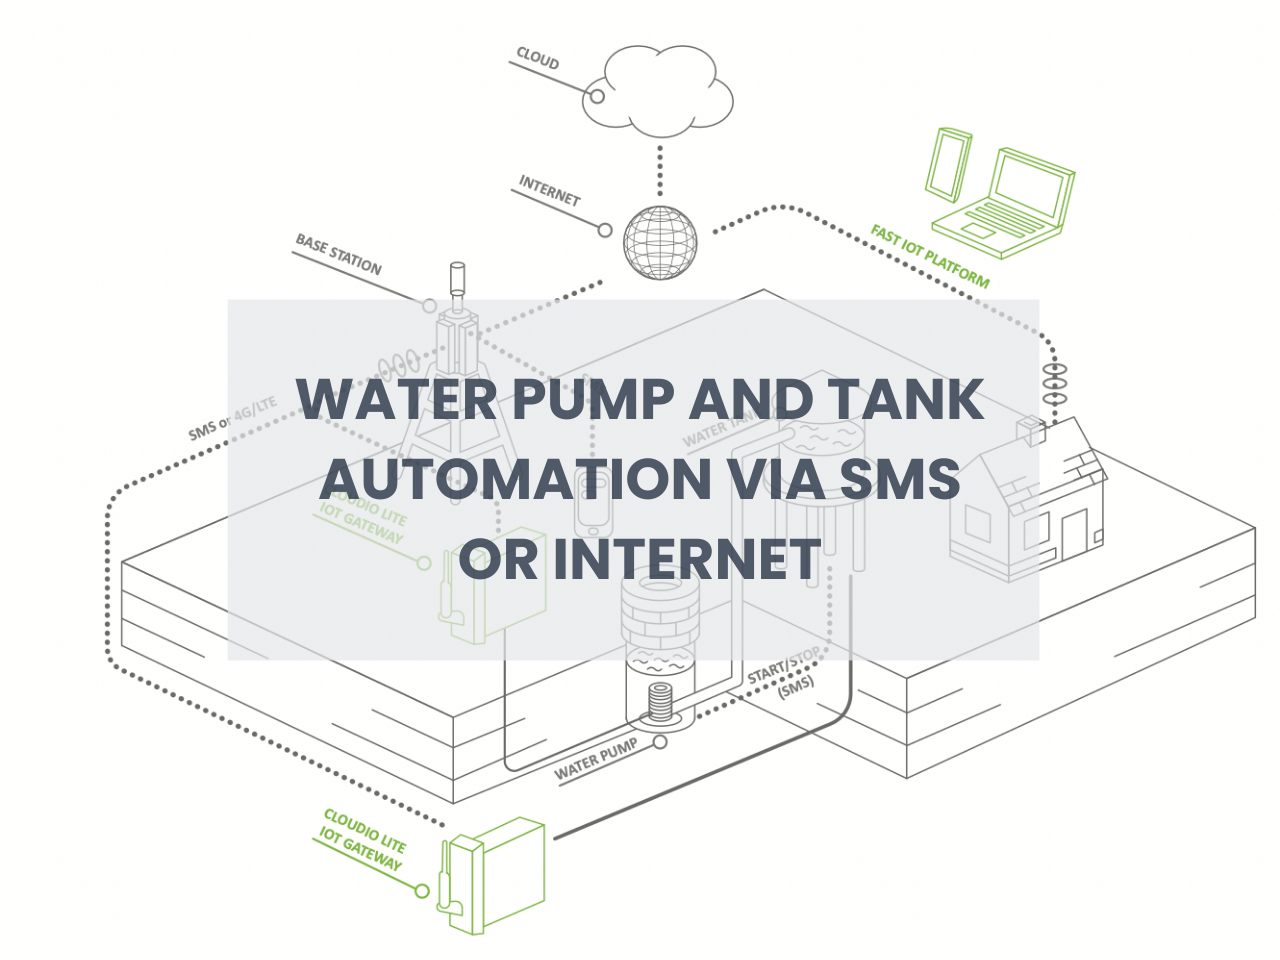 WATER PUMP AND TANK AUTOMATION VIA SMS OR INTERNET